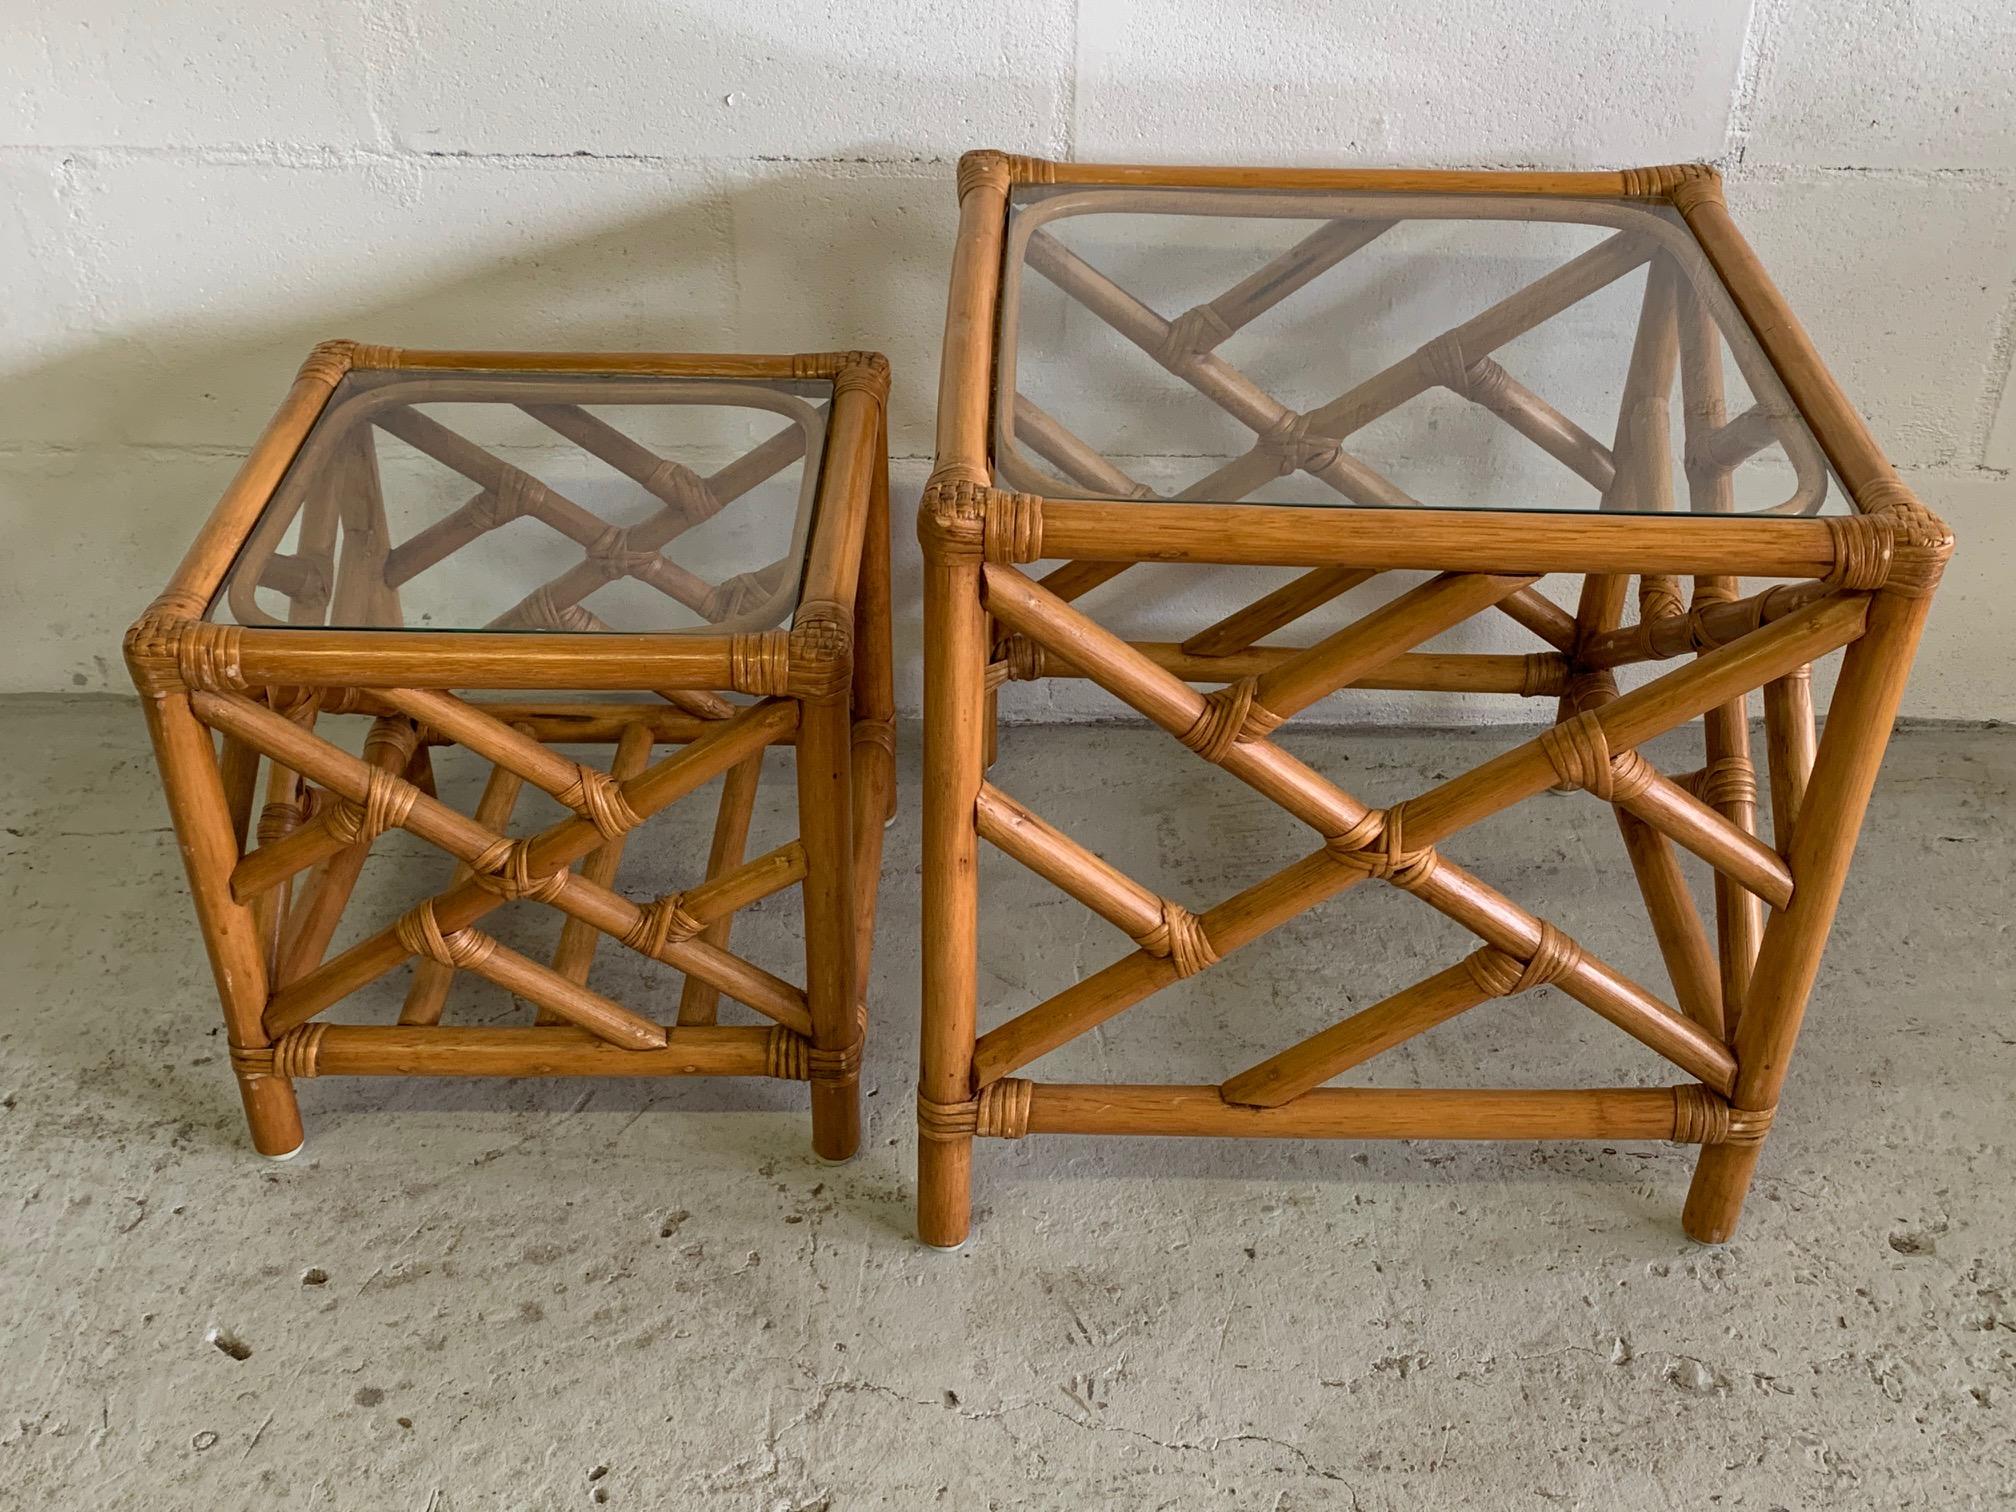 Rattan nesting tables feature Chinese Chippendale design and glass tops. Good vintage condition with minor imperfections consistent with age. Large table measures: 17